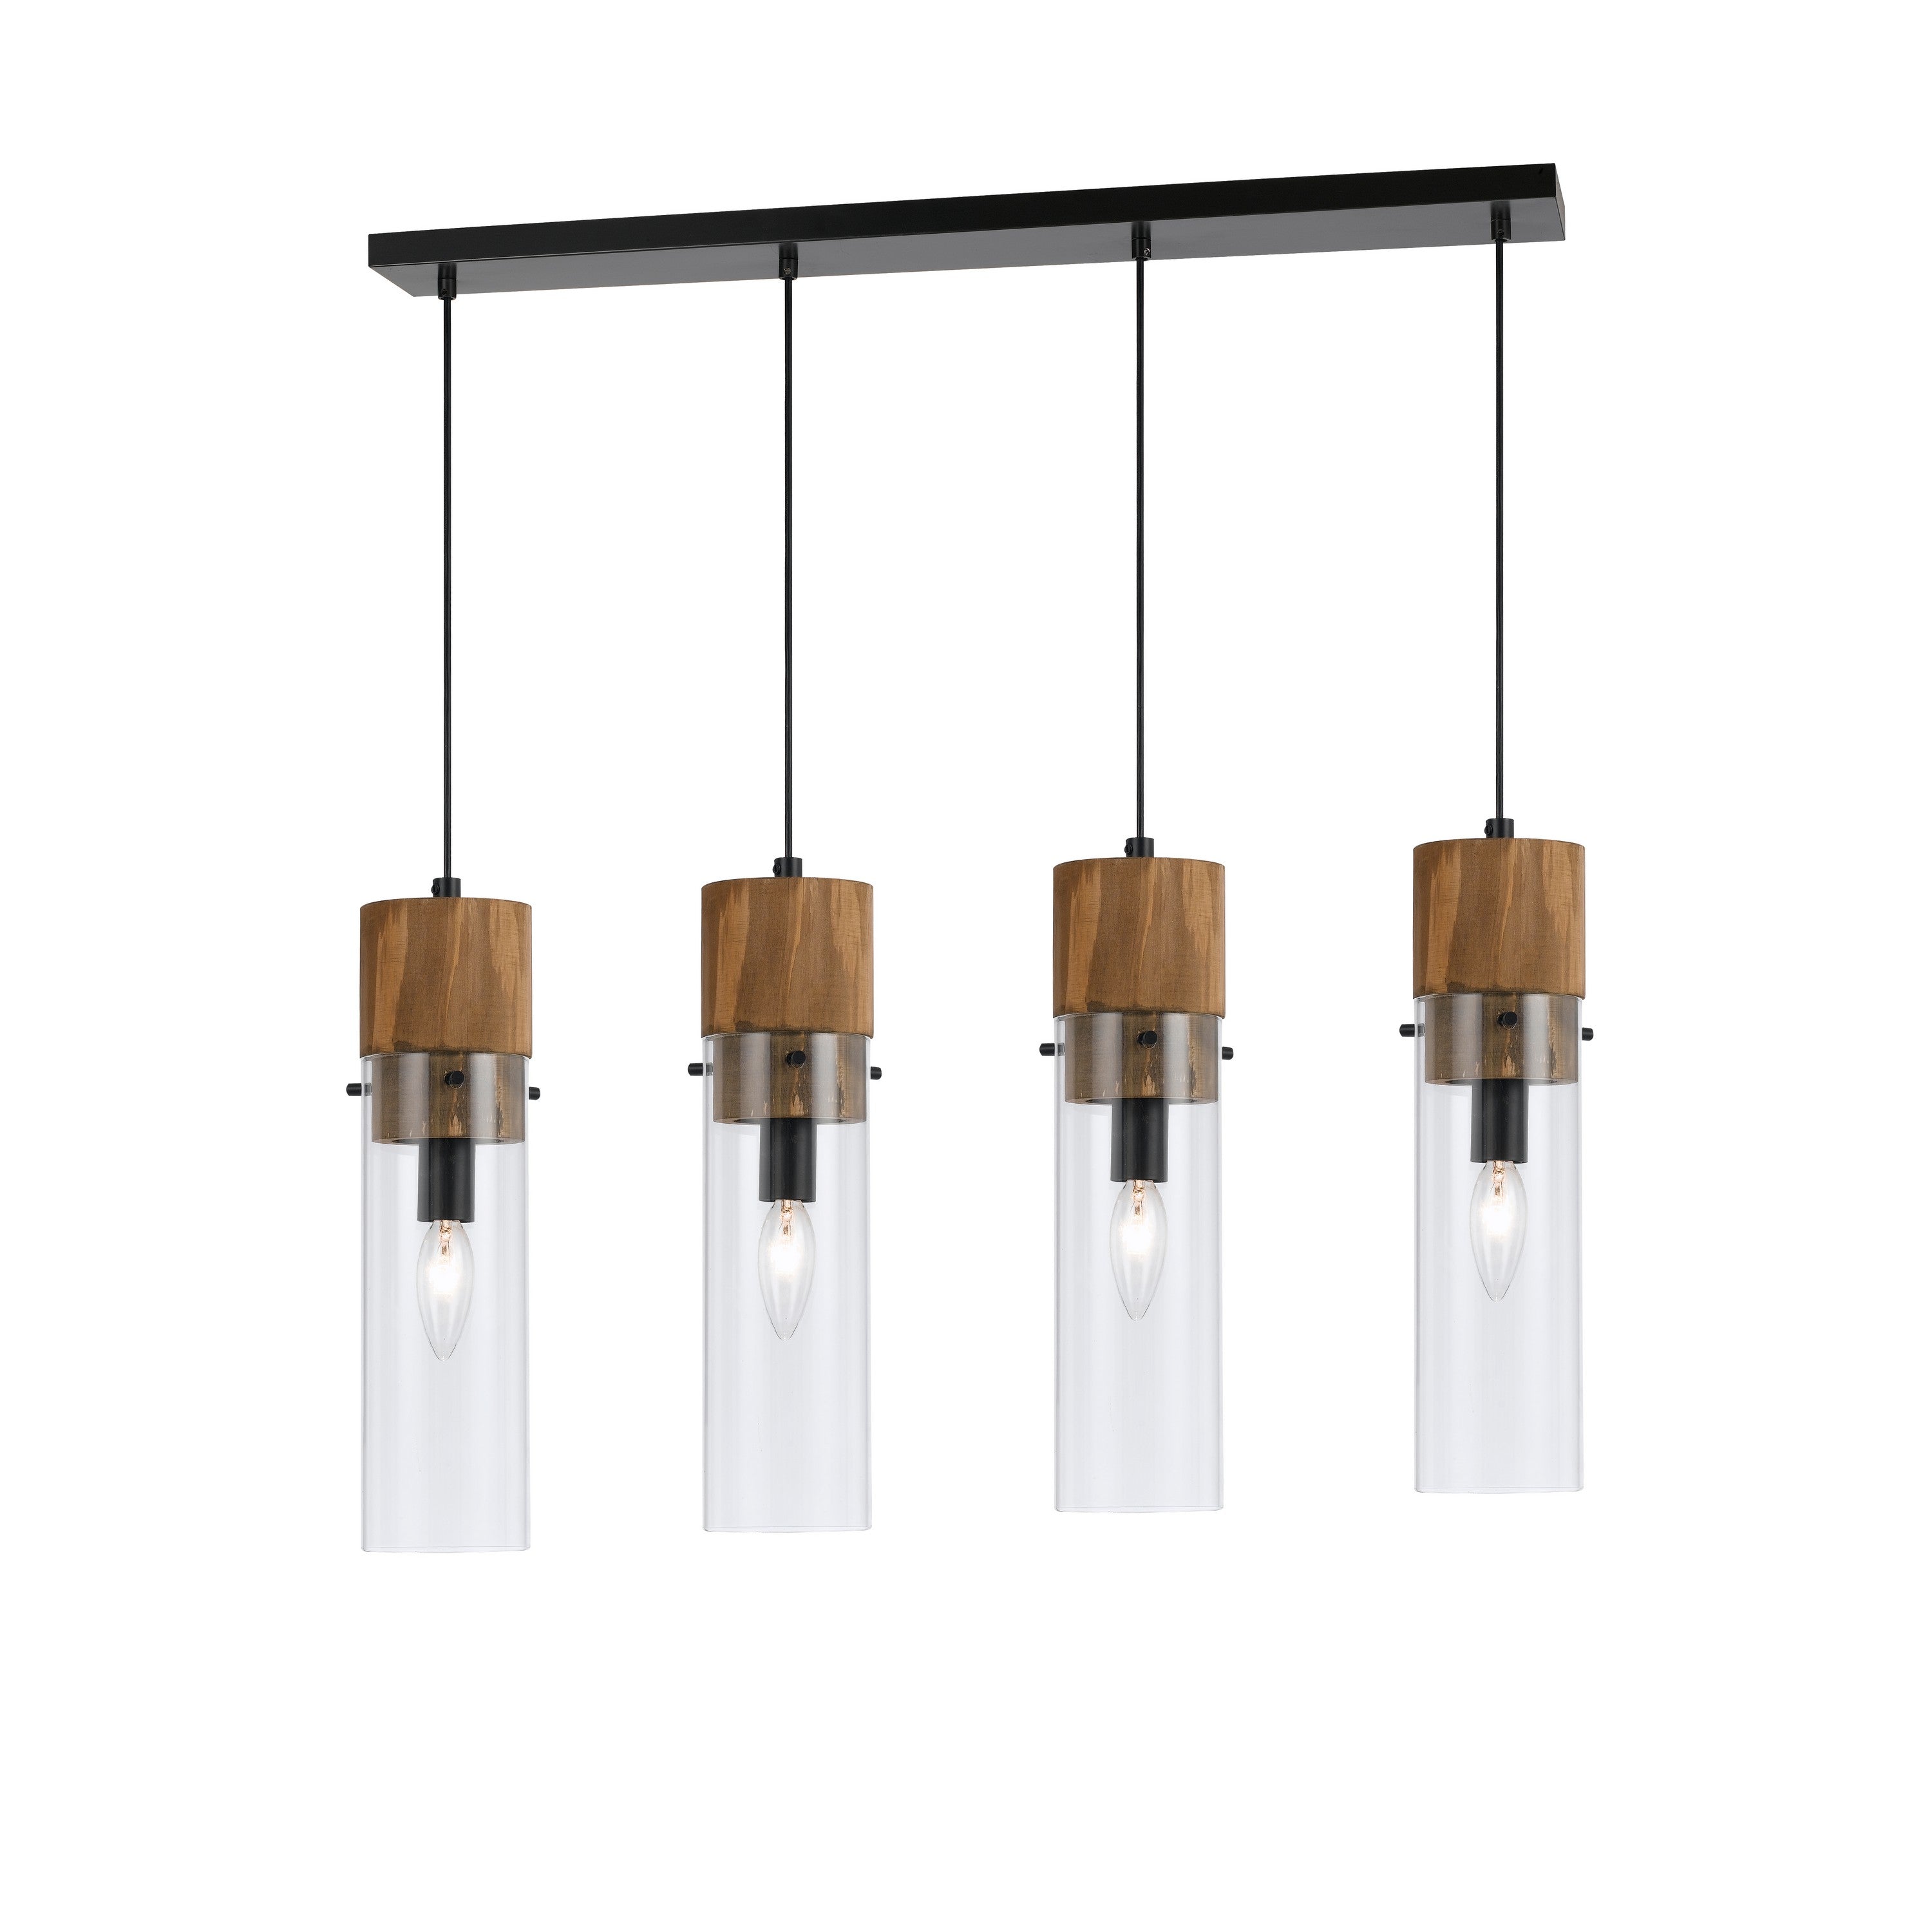 Benzara 60 x 4 Watt Brown Wood And Black Metal Track Lighting Pendant With Cylindrical Clear Shades